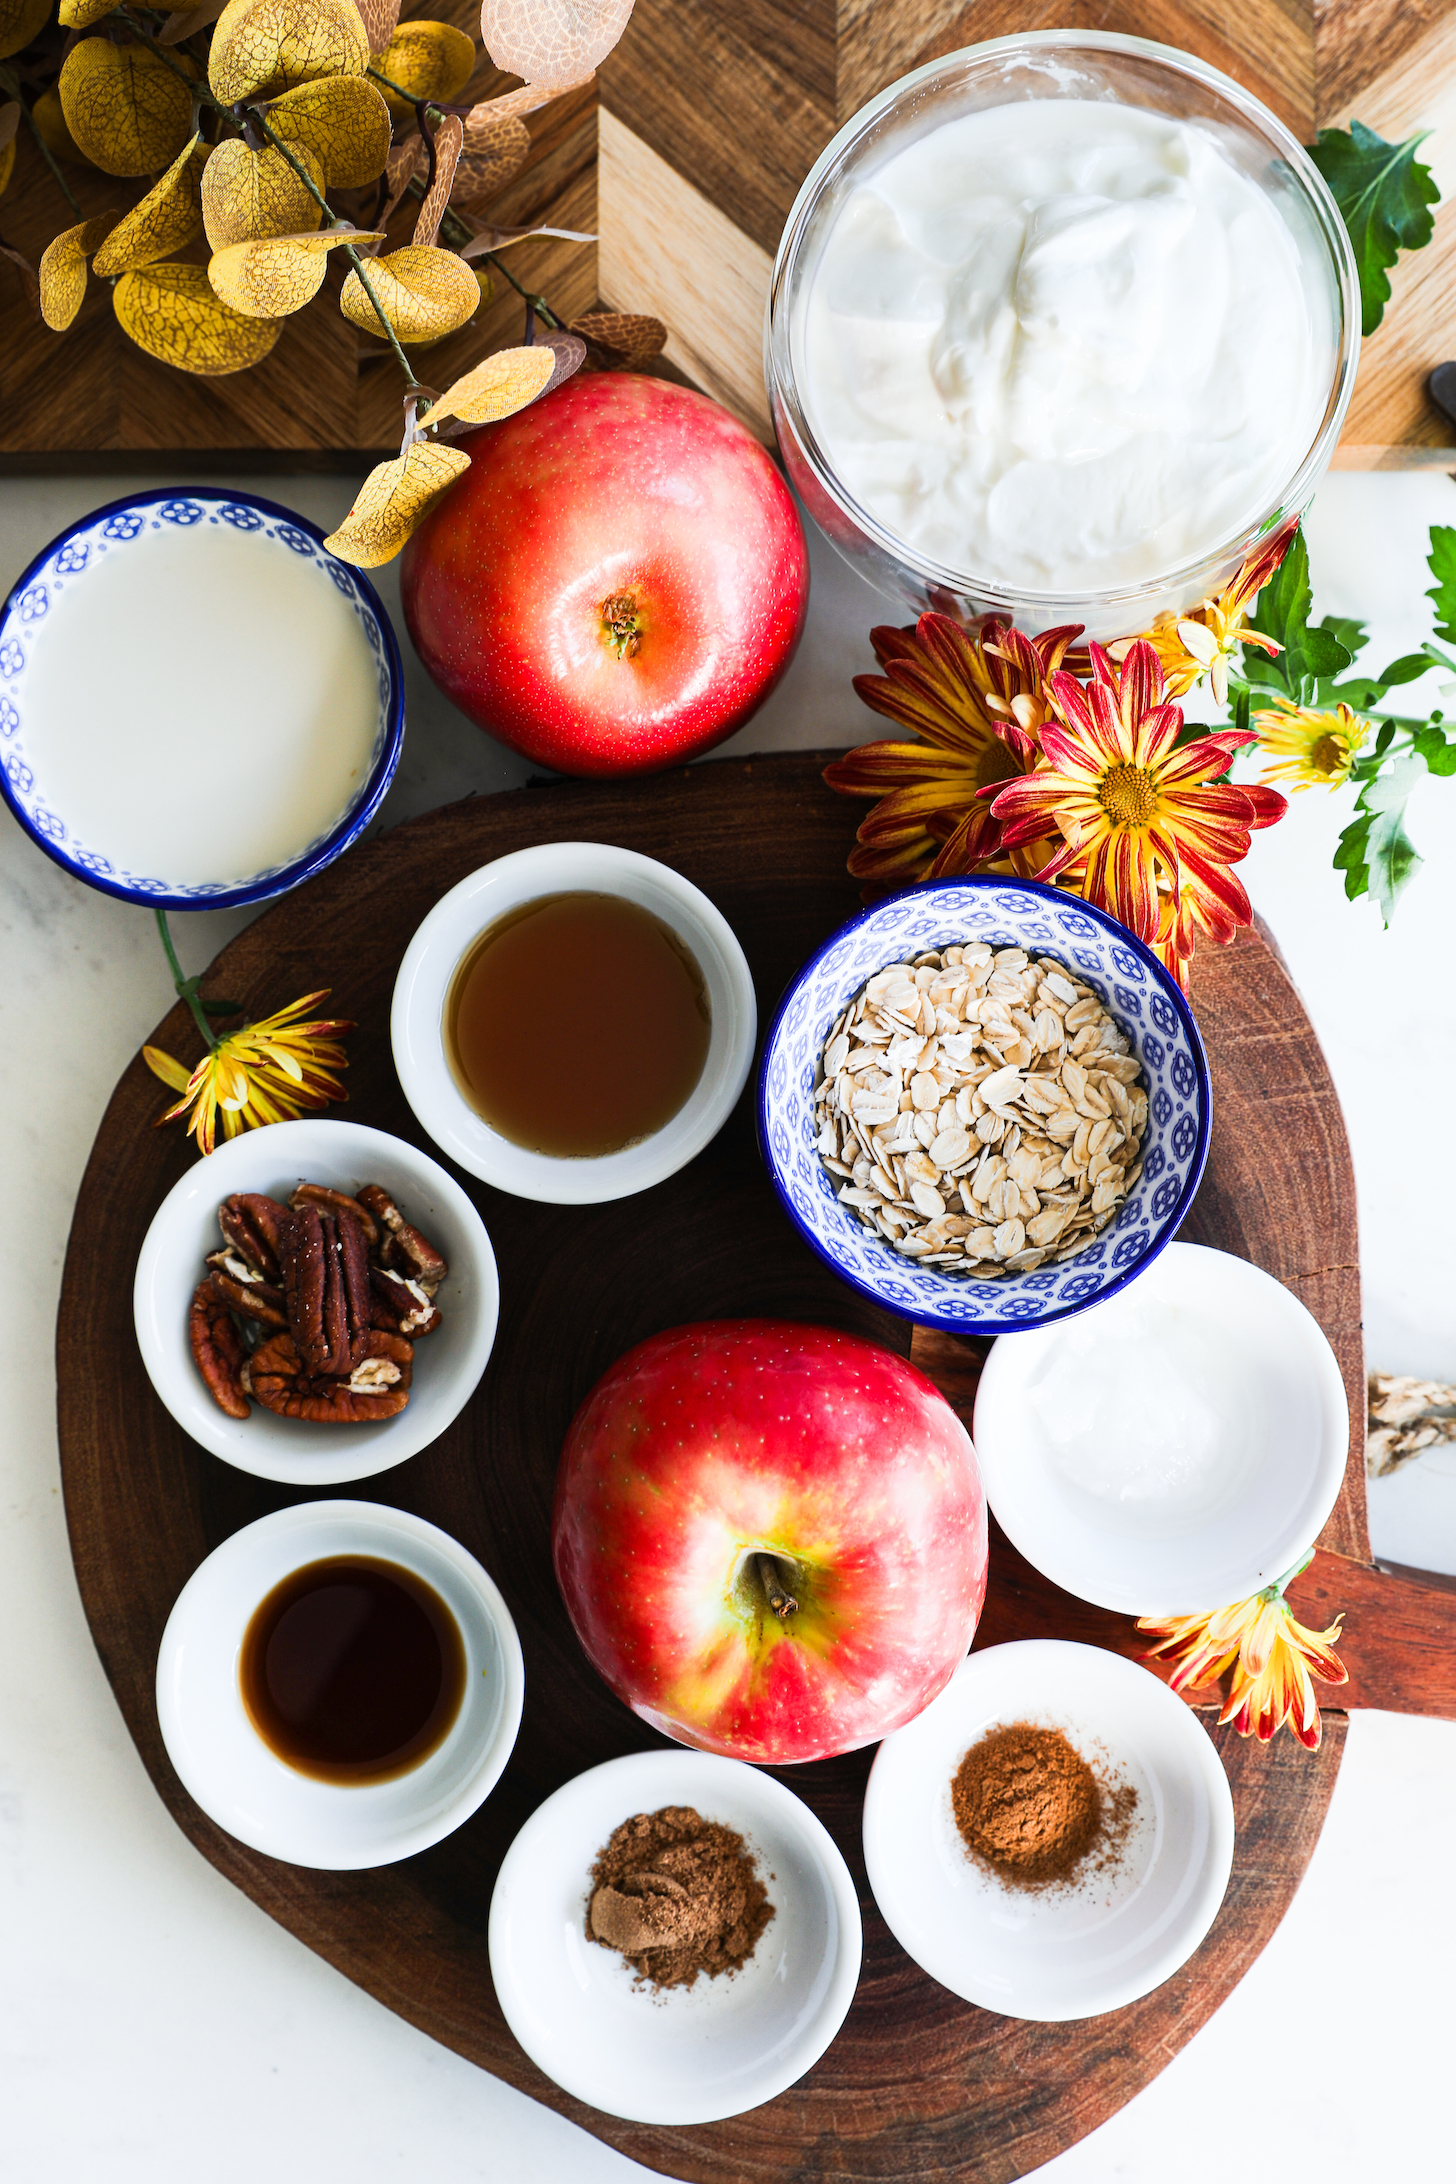 A collection of food ingredients like apples, yogurt, oats, sices and pecans.